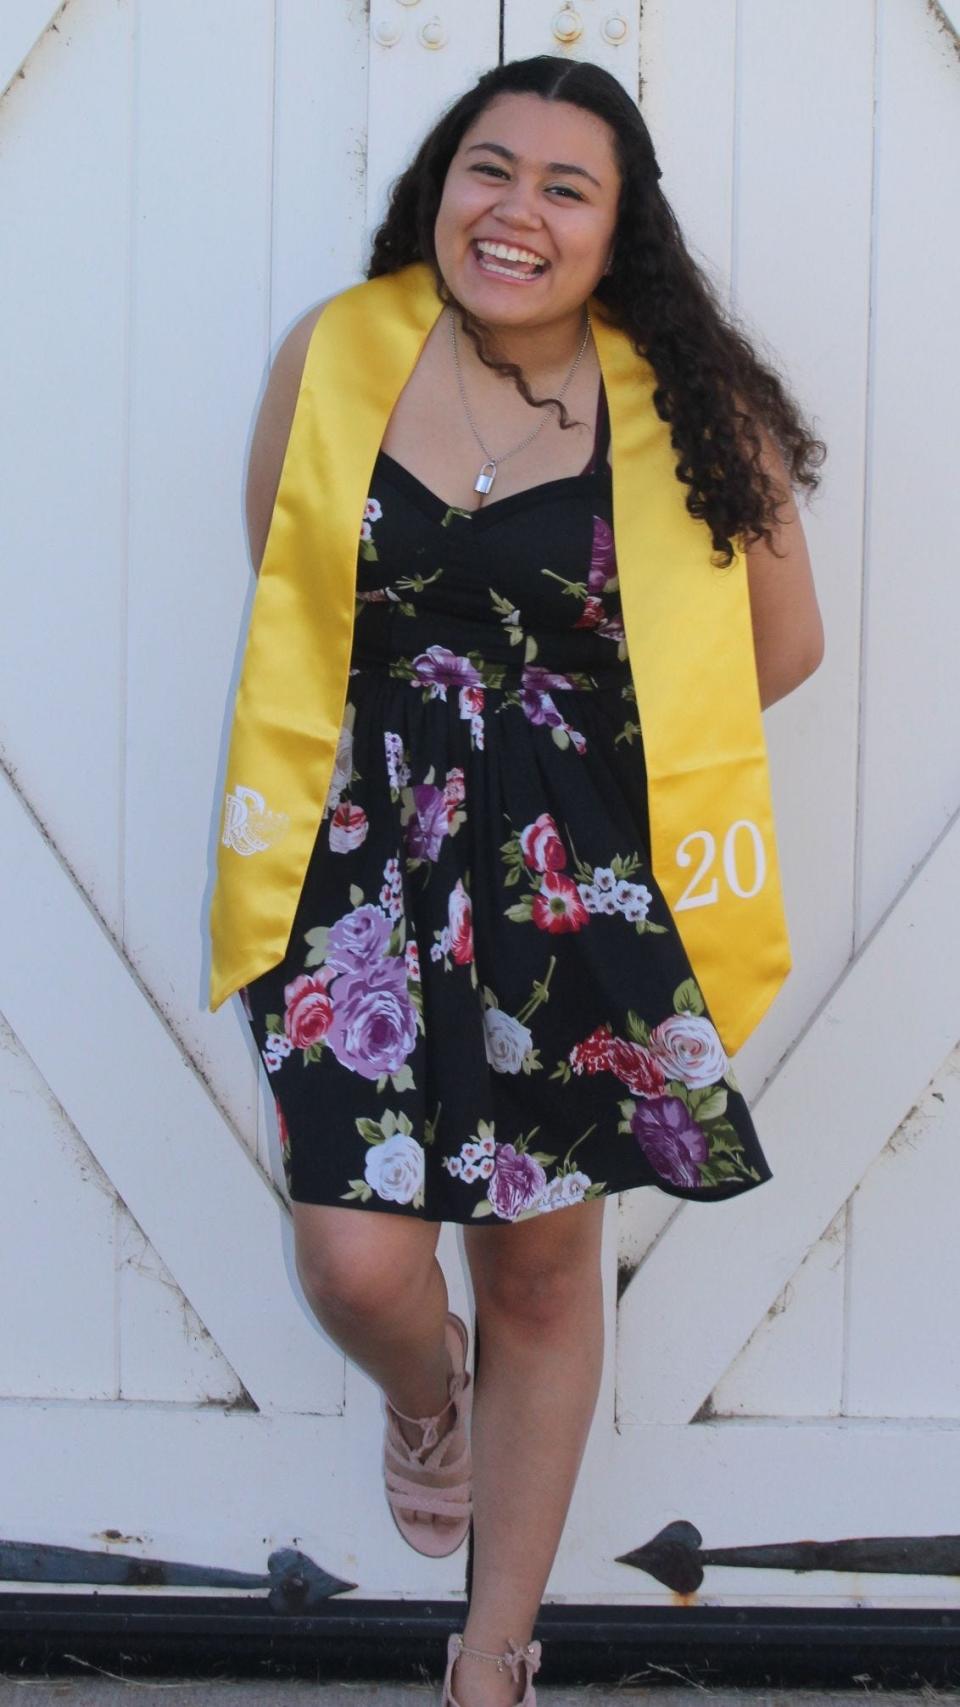 Ana Rodriguez Garcia went through the Teacher Pathway program at Roosevelt High School and is now a junior at the University of South Dakota, majoring in elementary education and Spanish while working part time as a paraprofessional at Austin Elementary School in Vermillion.